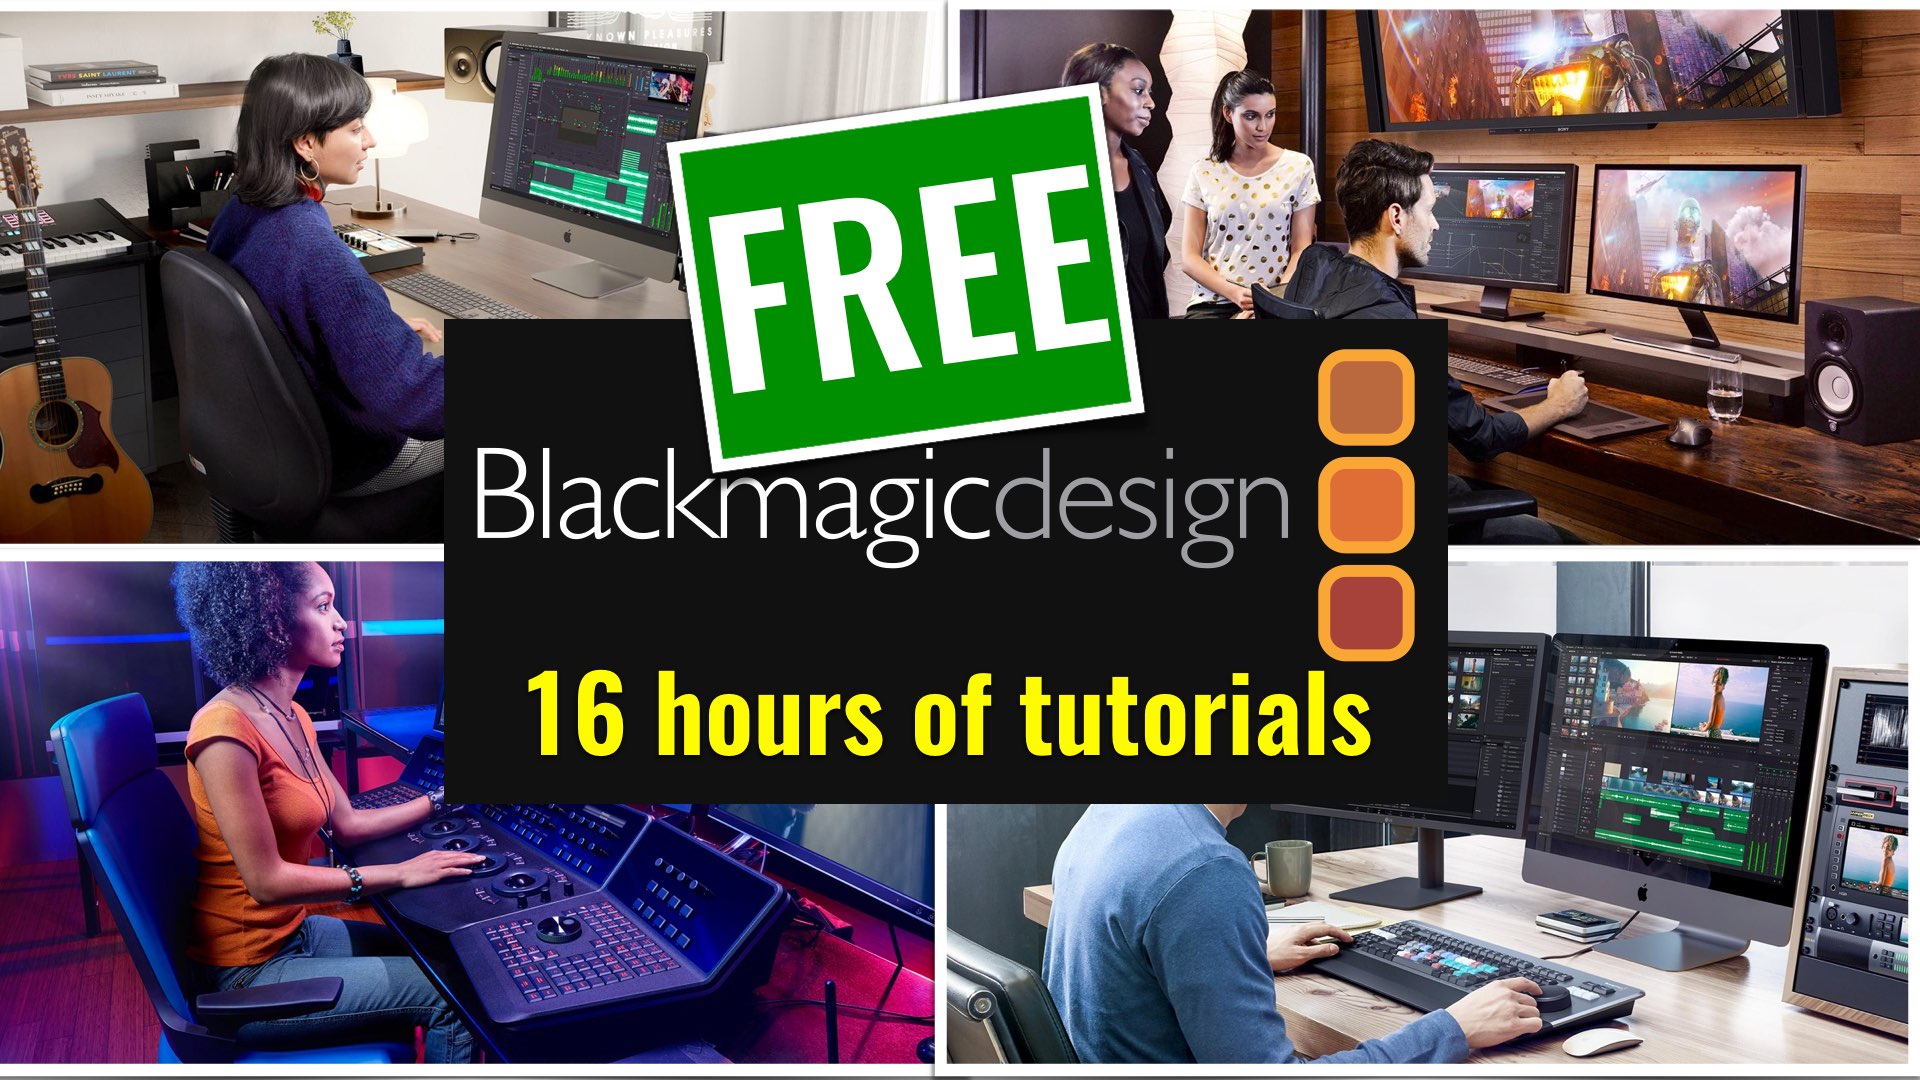 Blackmagic Publishes More Than 16 Hours of Video Tutorials, And They Are FREE